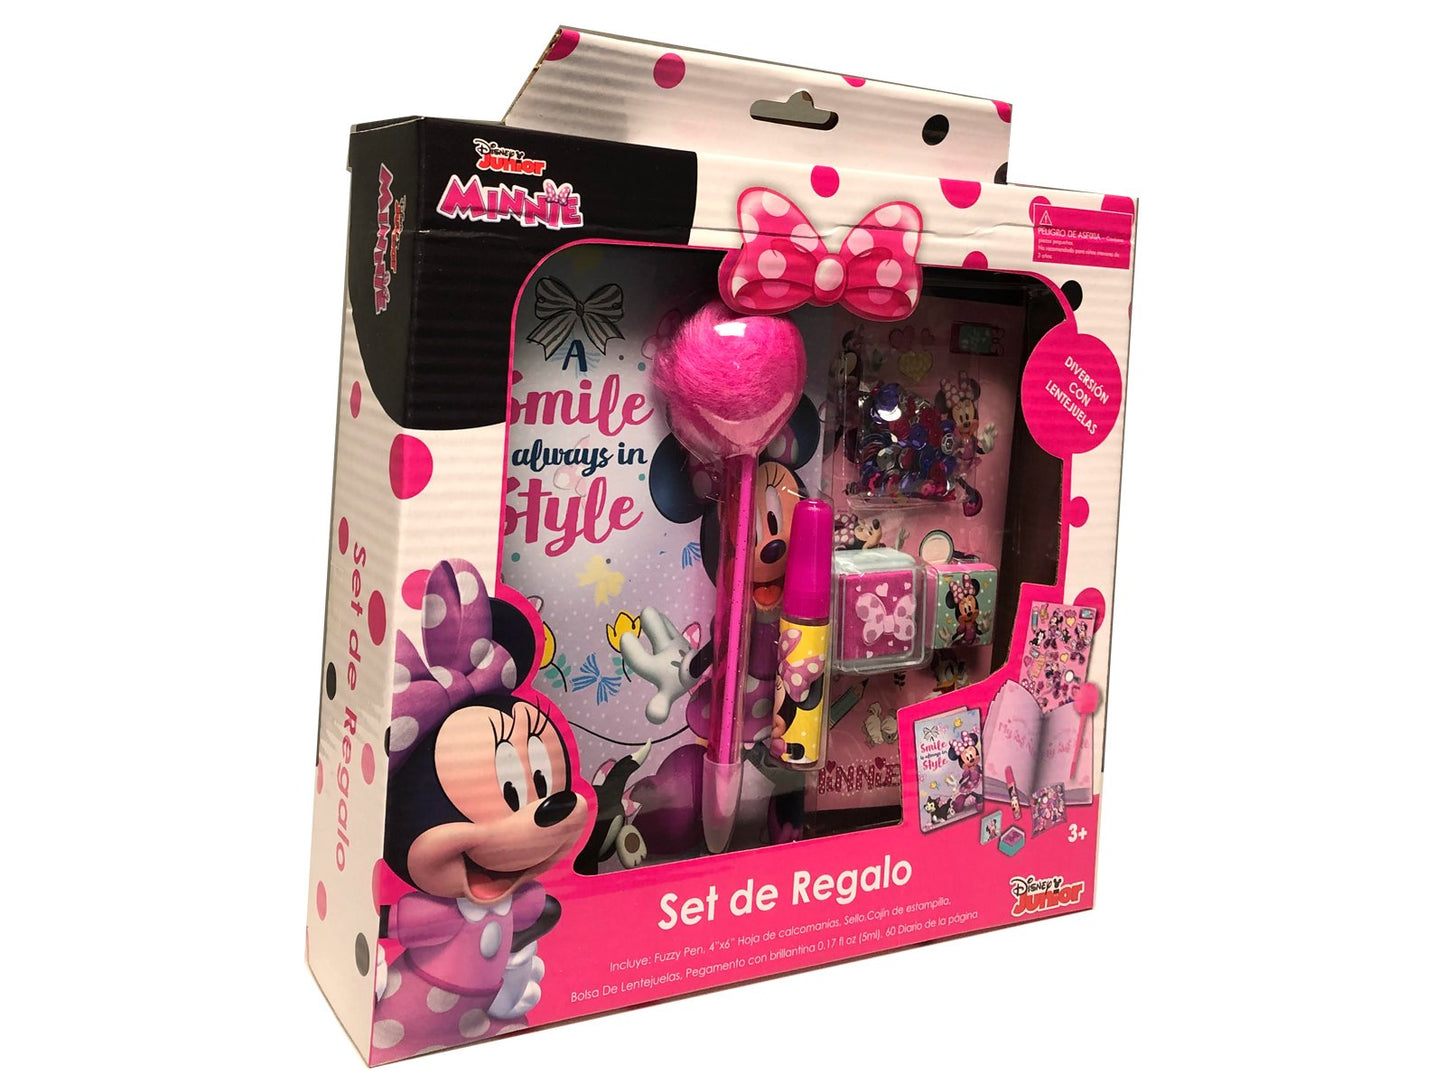 Minnie Mouse Diary Set in Box - Comes with diary, pen, stamper, stickers, and more (in Spanish cover)